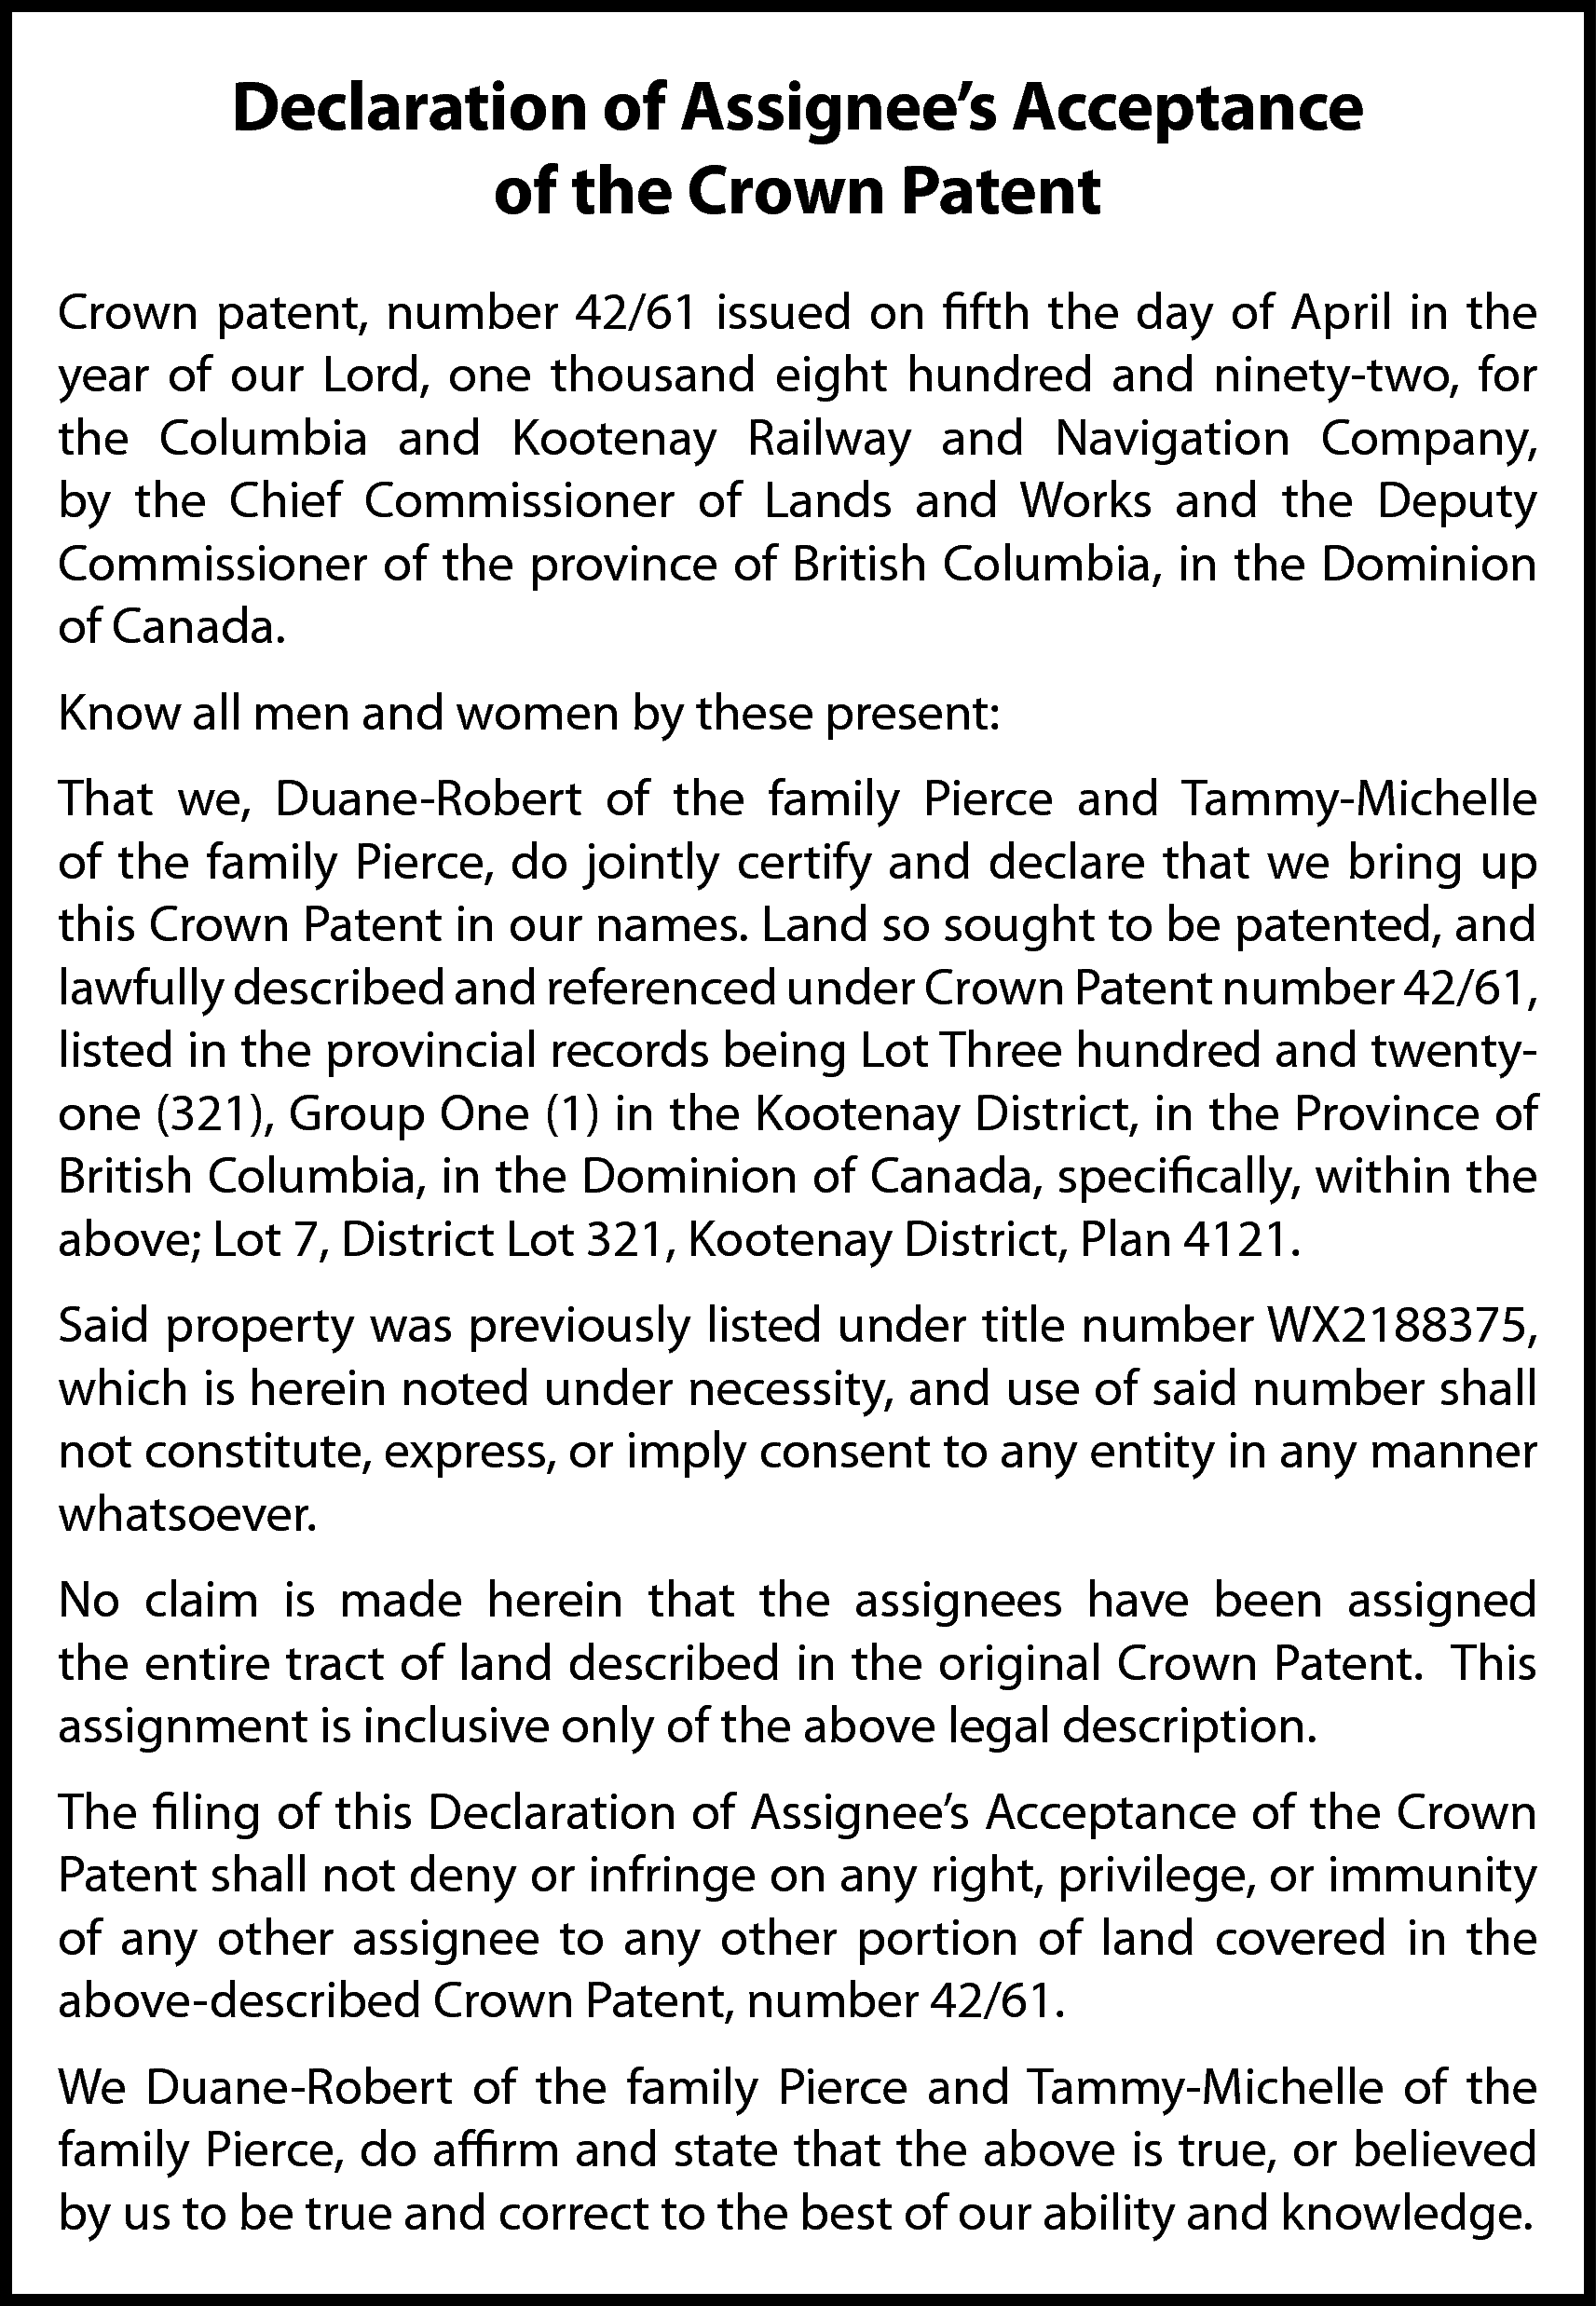 Declaration of Assignee’s Acceptance <br>of  Declaration of Assignee’s Acceptance  of the Crown Patent  Crown patent, number 42/61 issued on fifth the day of April in the  year of our Lord, one thousand eight hundred and ninety-two, for  the Columbia and Kootenay Railway and Navigation Company,  by the Chief Commissioner of Lands and Works and the Deputy  Commissioner of the province of British Columbia, in the Dominion  of Canada.  Know all men and women by these present:  That we, Duane-Robert of the family Pierce and Tammy-Michelle  of the family Pierce, do jointly certify and declare that we bring up  this Crown Patent in our names. Land so sought to be patented, and  lawfully described and referenced under Crown Patent number 42/61,  listed in the provincial records being Lot Three hundred and twentyone (321), Group One (1) in the Kootenay District, in the Province of  British Columbia, in the Dominion of Canada, specifically, within the  above; Lot 7, District Lot 321, Kootenay District, Plan 4121.  Said property was previously listed under title number WX2188375,  which is herein noted under necessity, and use of said number shall  not constitute, express, or imply consent to any entity in any manner  whatsoever.  No claim is made herein that the assignees have been assigned  the entire tract of land described in the original Crown Patent. This  assignment is inclusive only of the above legal description.  The filing of this Declaration of Assignee’s Acceptance of the Crown  Patent shall not deny or infringe on any right, privilege, or immunity  of any other assignee to any other portion of land covered in the  above-described Crown Patent, number 42/61.  We Duane-Robert of the family Pierce and Tammy-Michelle of the  family Pierce, do affirm and state that the above is true, or believed  by us to be true and correct to the best of our ability and knowledge.    